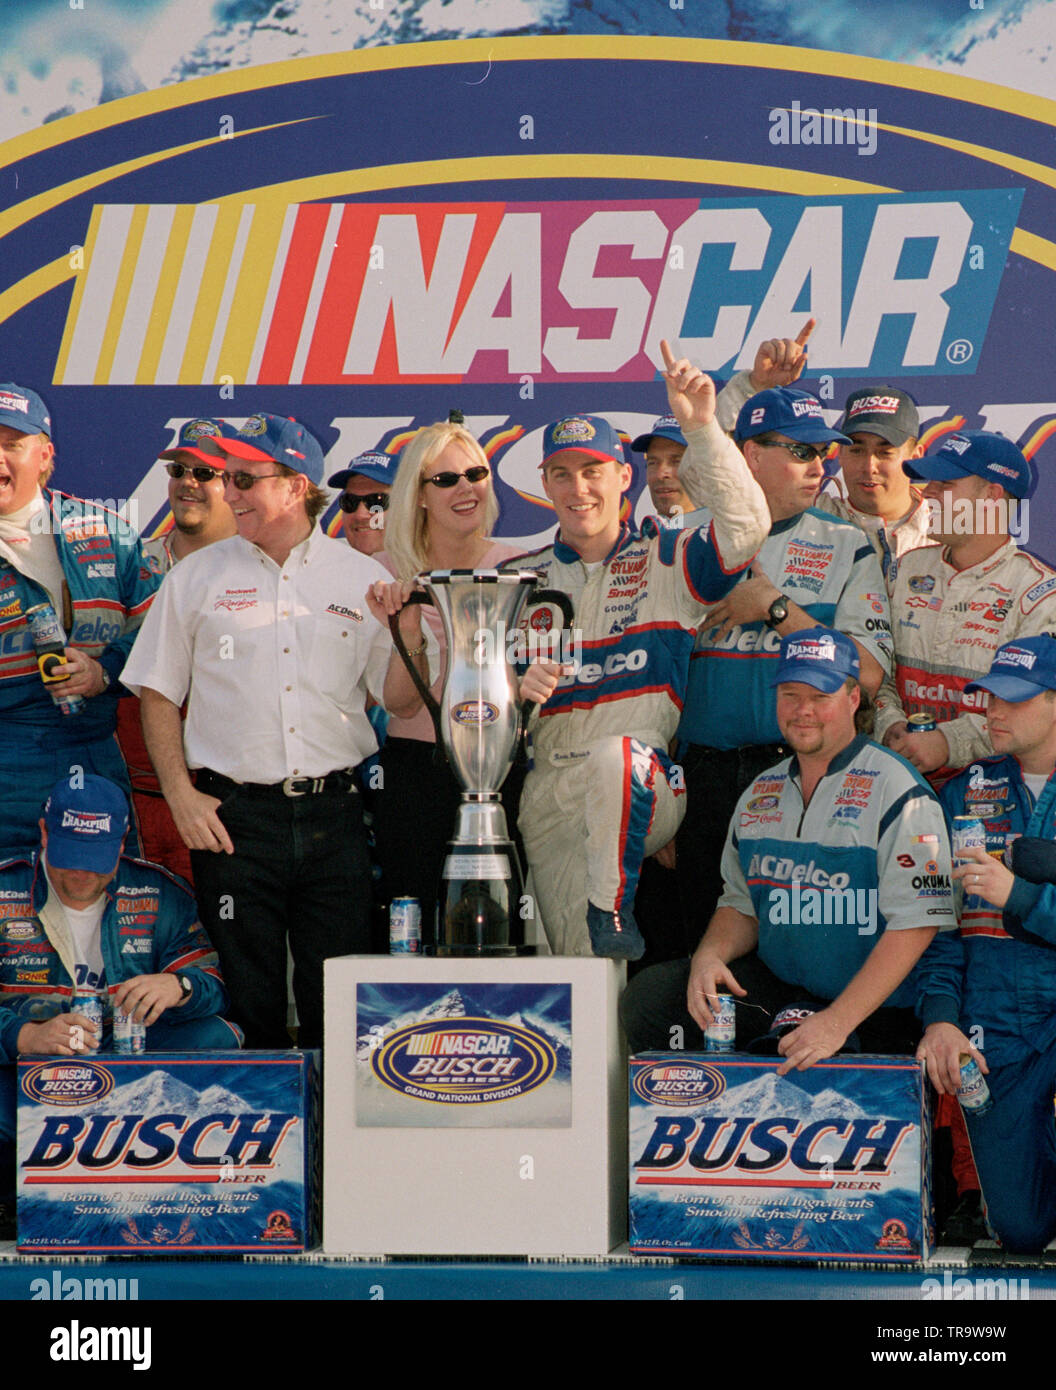 NASCAR driver Kevin Harvick celebrates winning the BUSCH Series Championship at Homestead Miami Speedway on November 10, 2001. Stock Photo